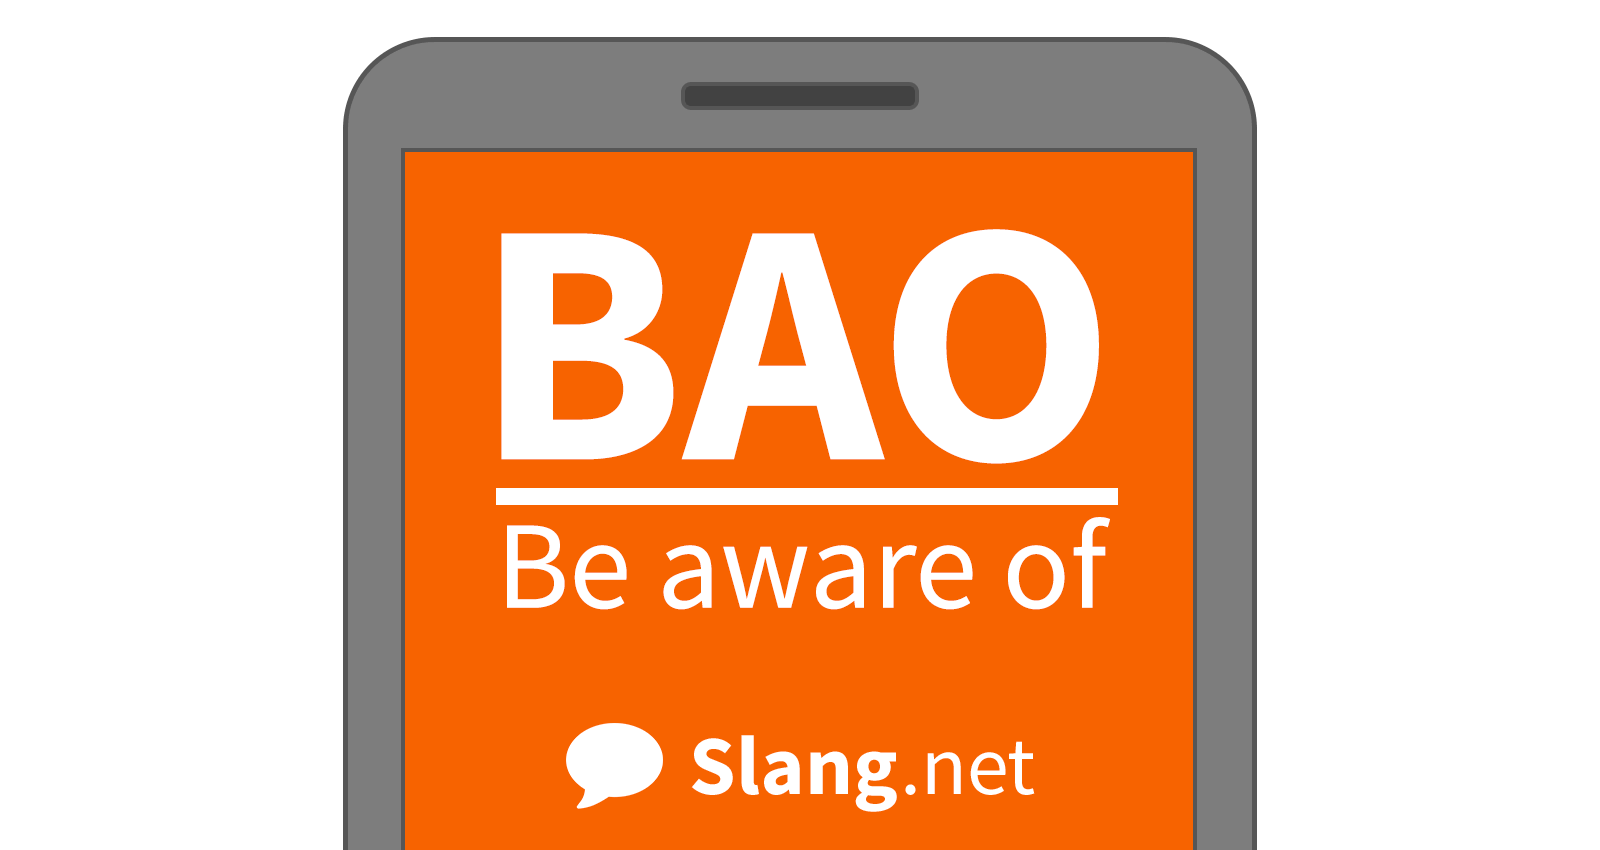 You'll likely see BAO in messages and emails